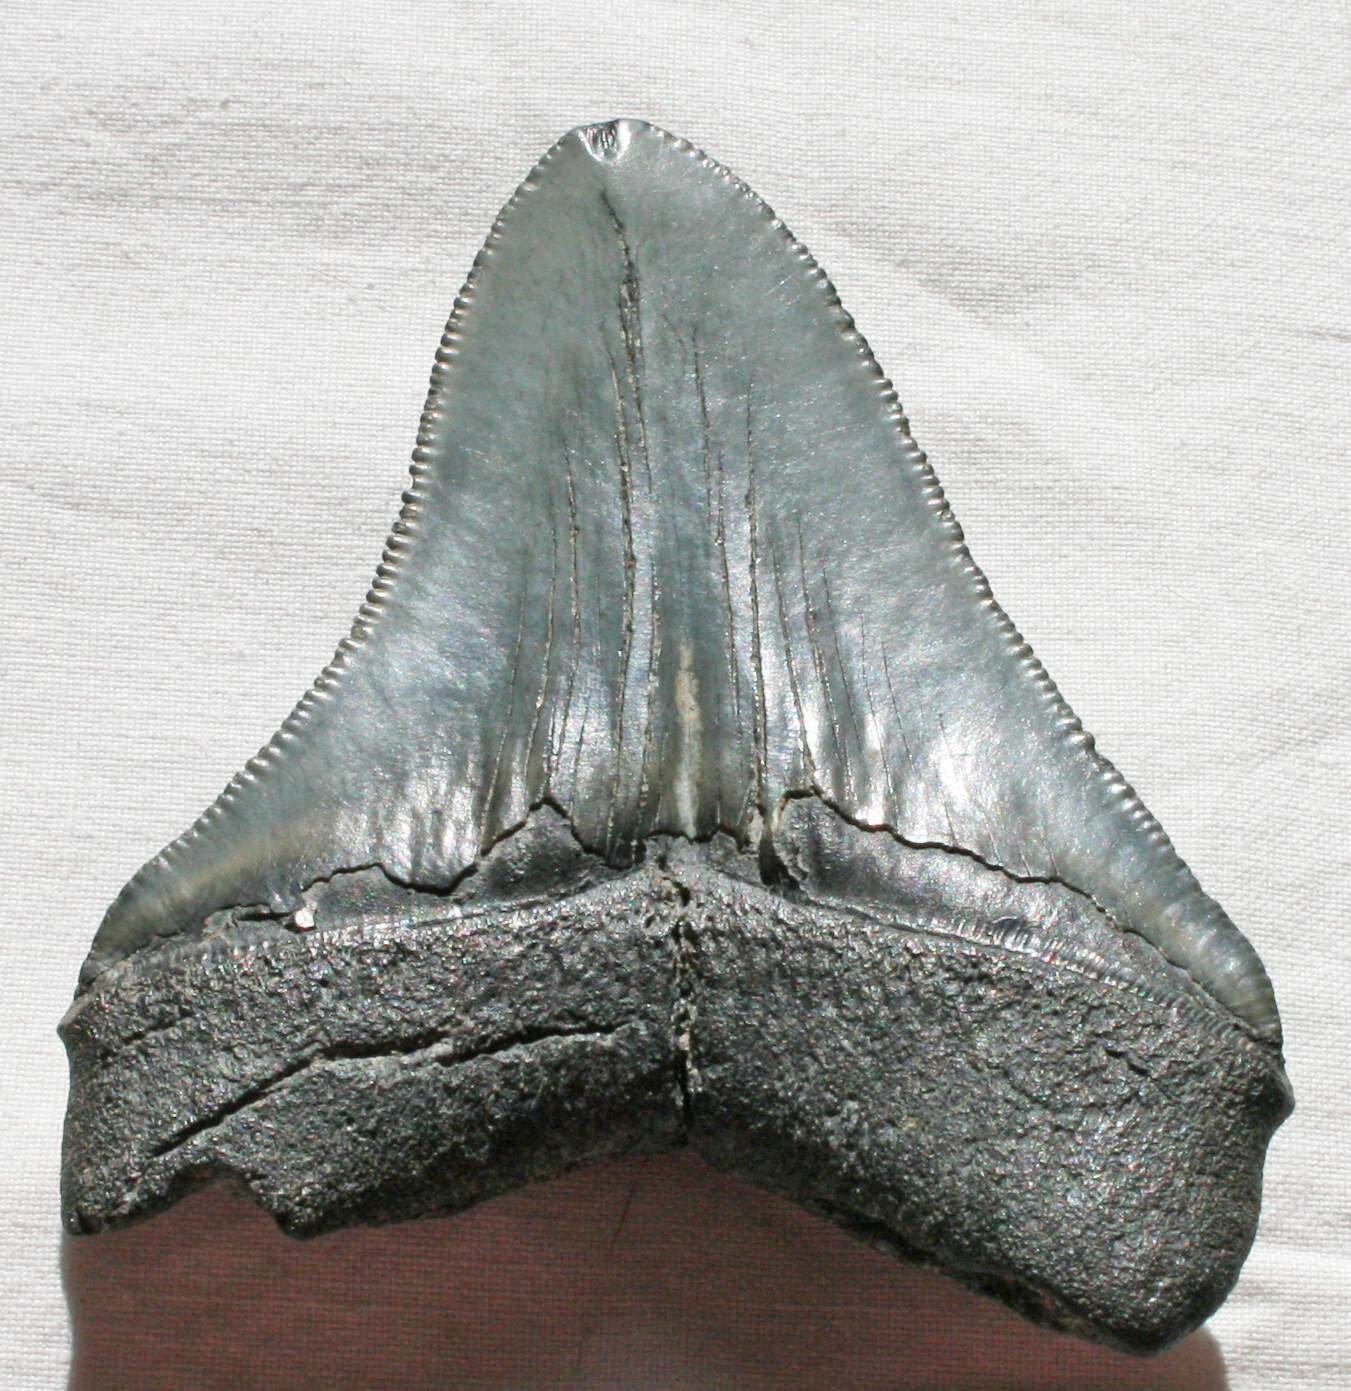 Carcharodon Megalodon tooth